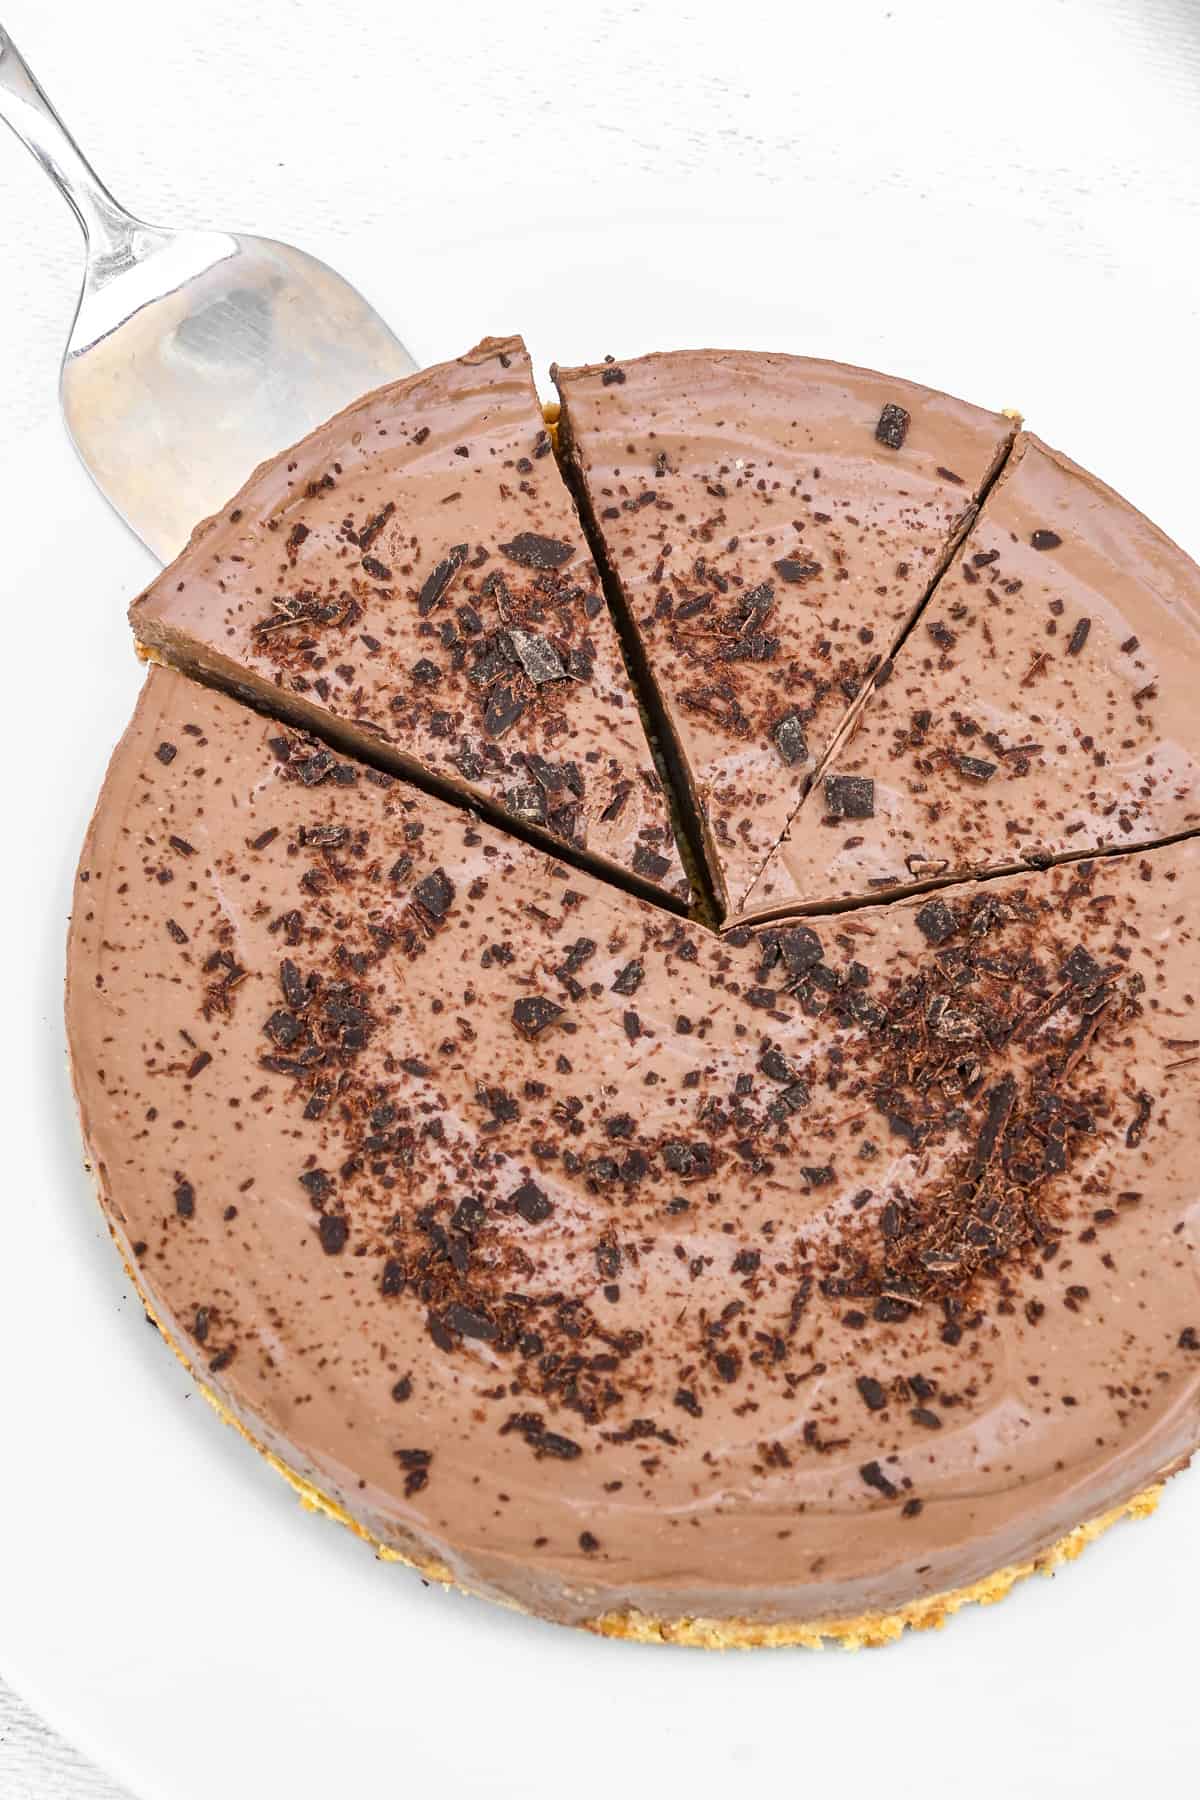 A top down shot of the tart, sprinkled with chocolate shavings. A slice is lifted away using a cake server.